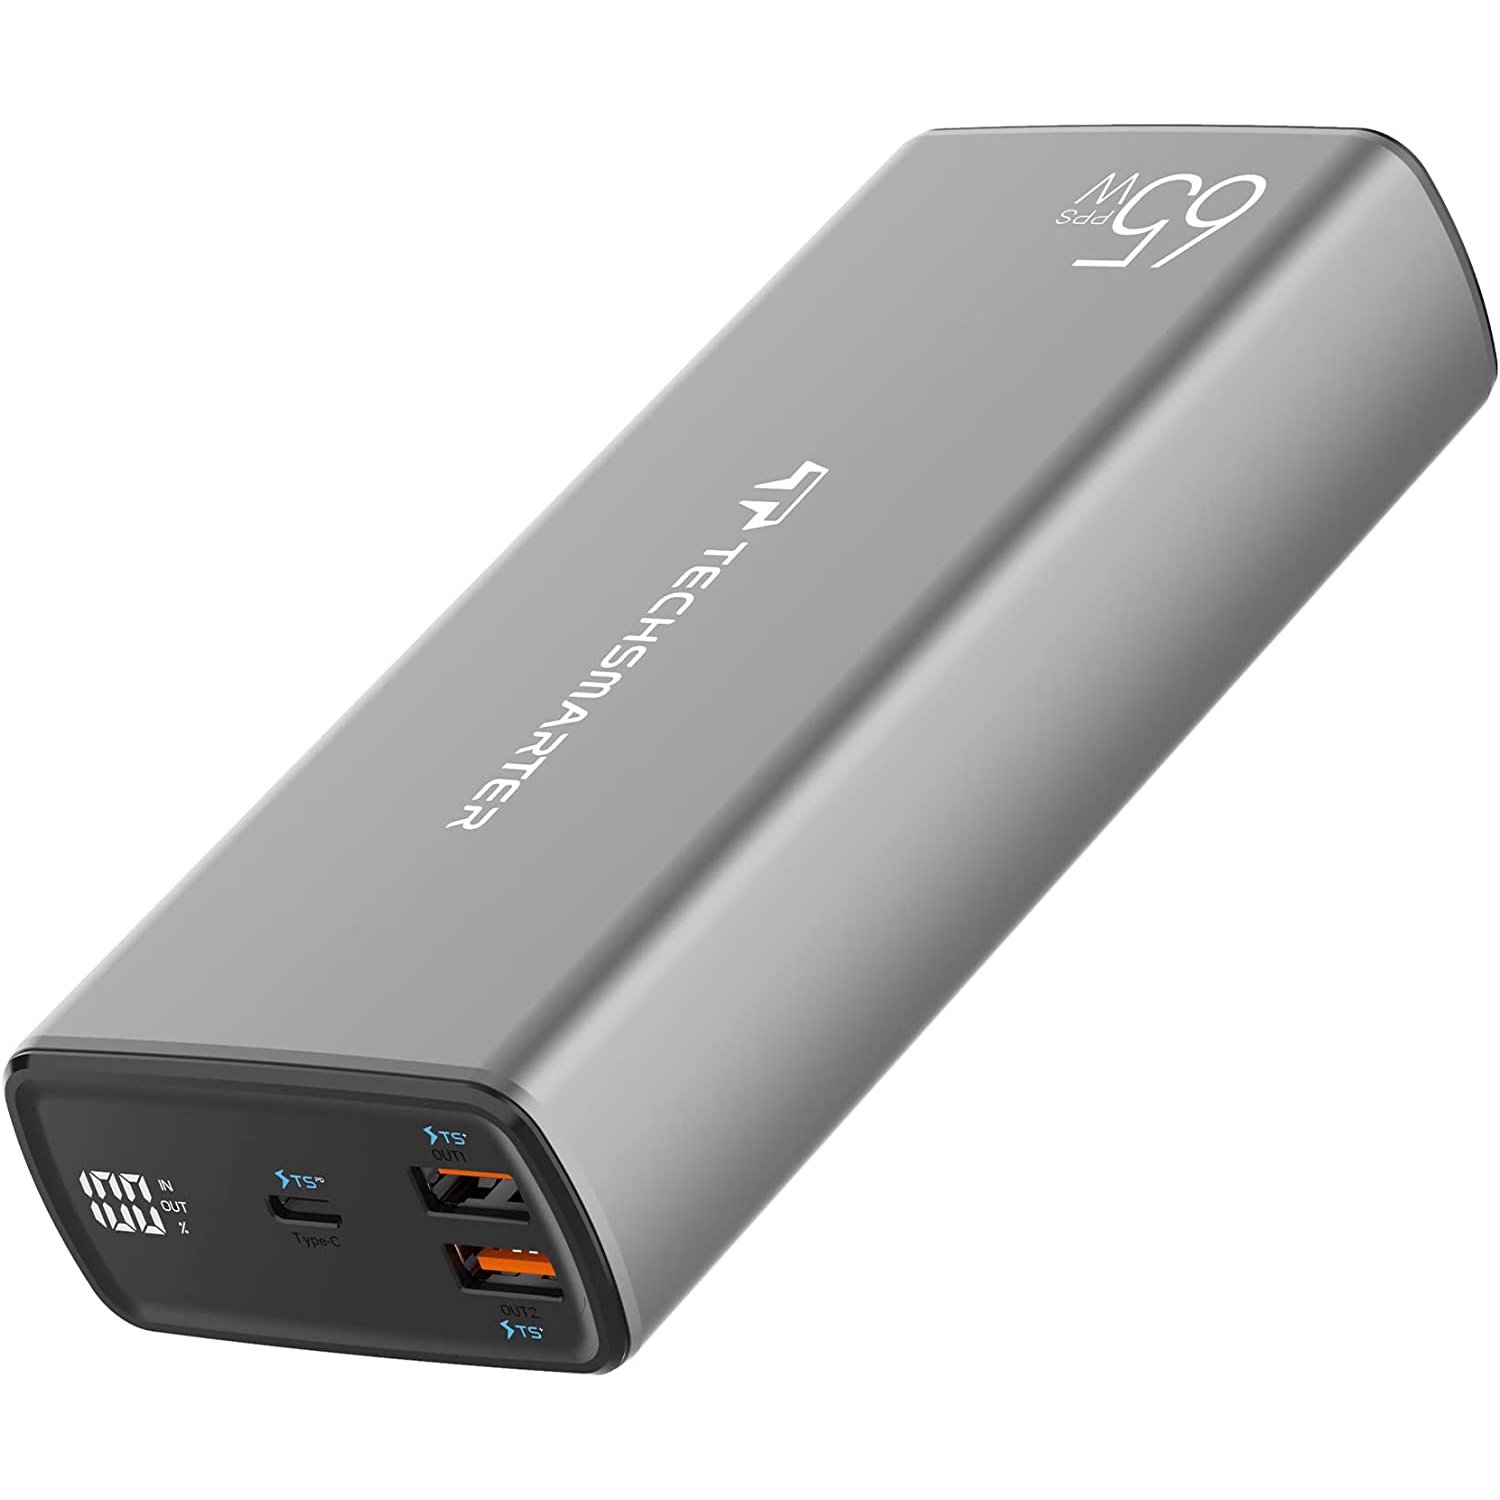 Techsmarter 30000mAh 65W USB-C Laptop Power Bank/Fast Charger for iPhone, Samsung Galaxy, Androids, iPad, MacBook Air/Pro